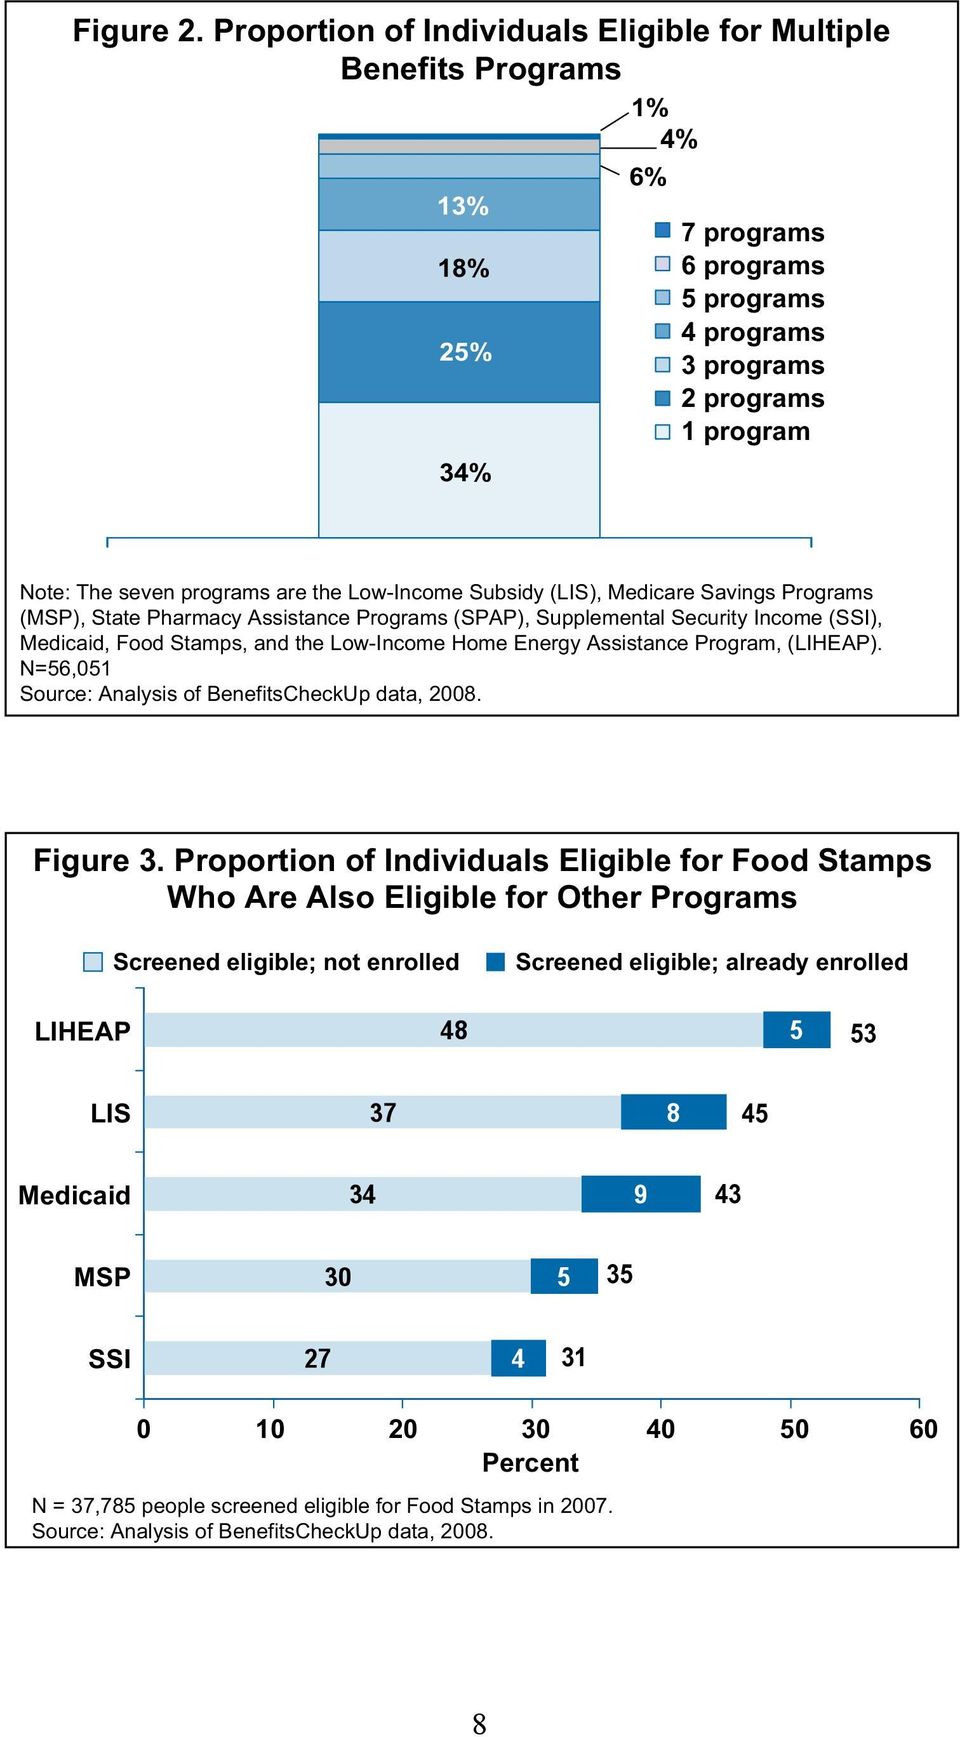 Low-Income Subsidy (LIS), Medicare Savings Programs (MSP), State Pharmacy Assistance Programs (SPAP), Supplemental Security Income (SSI), Medicaid, Food Stamps, and the Low-Income Home Energy